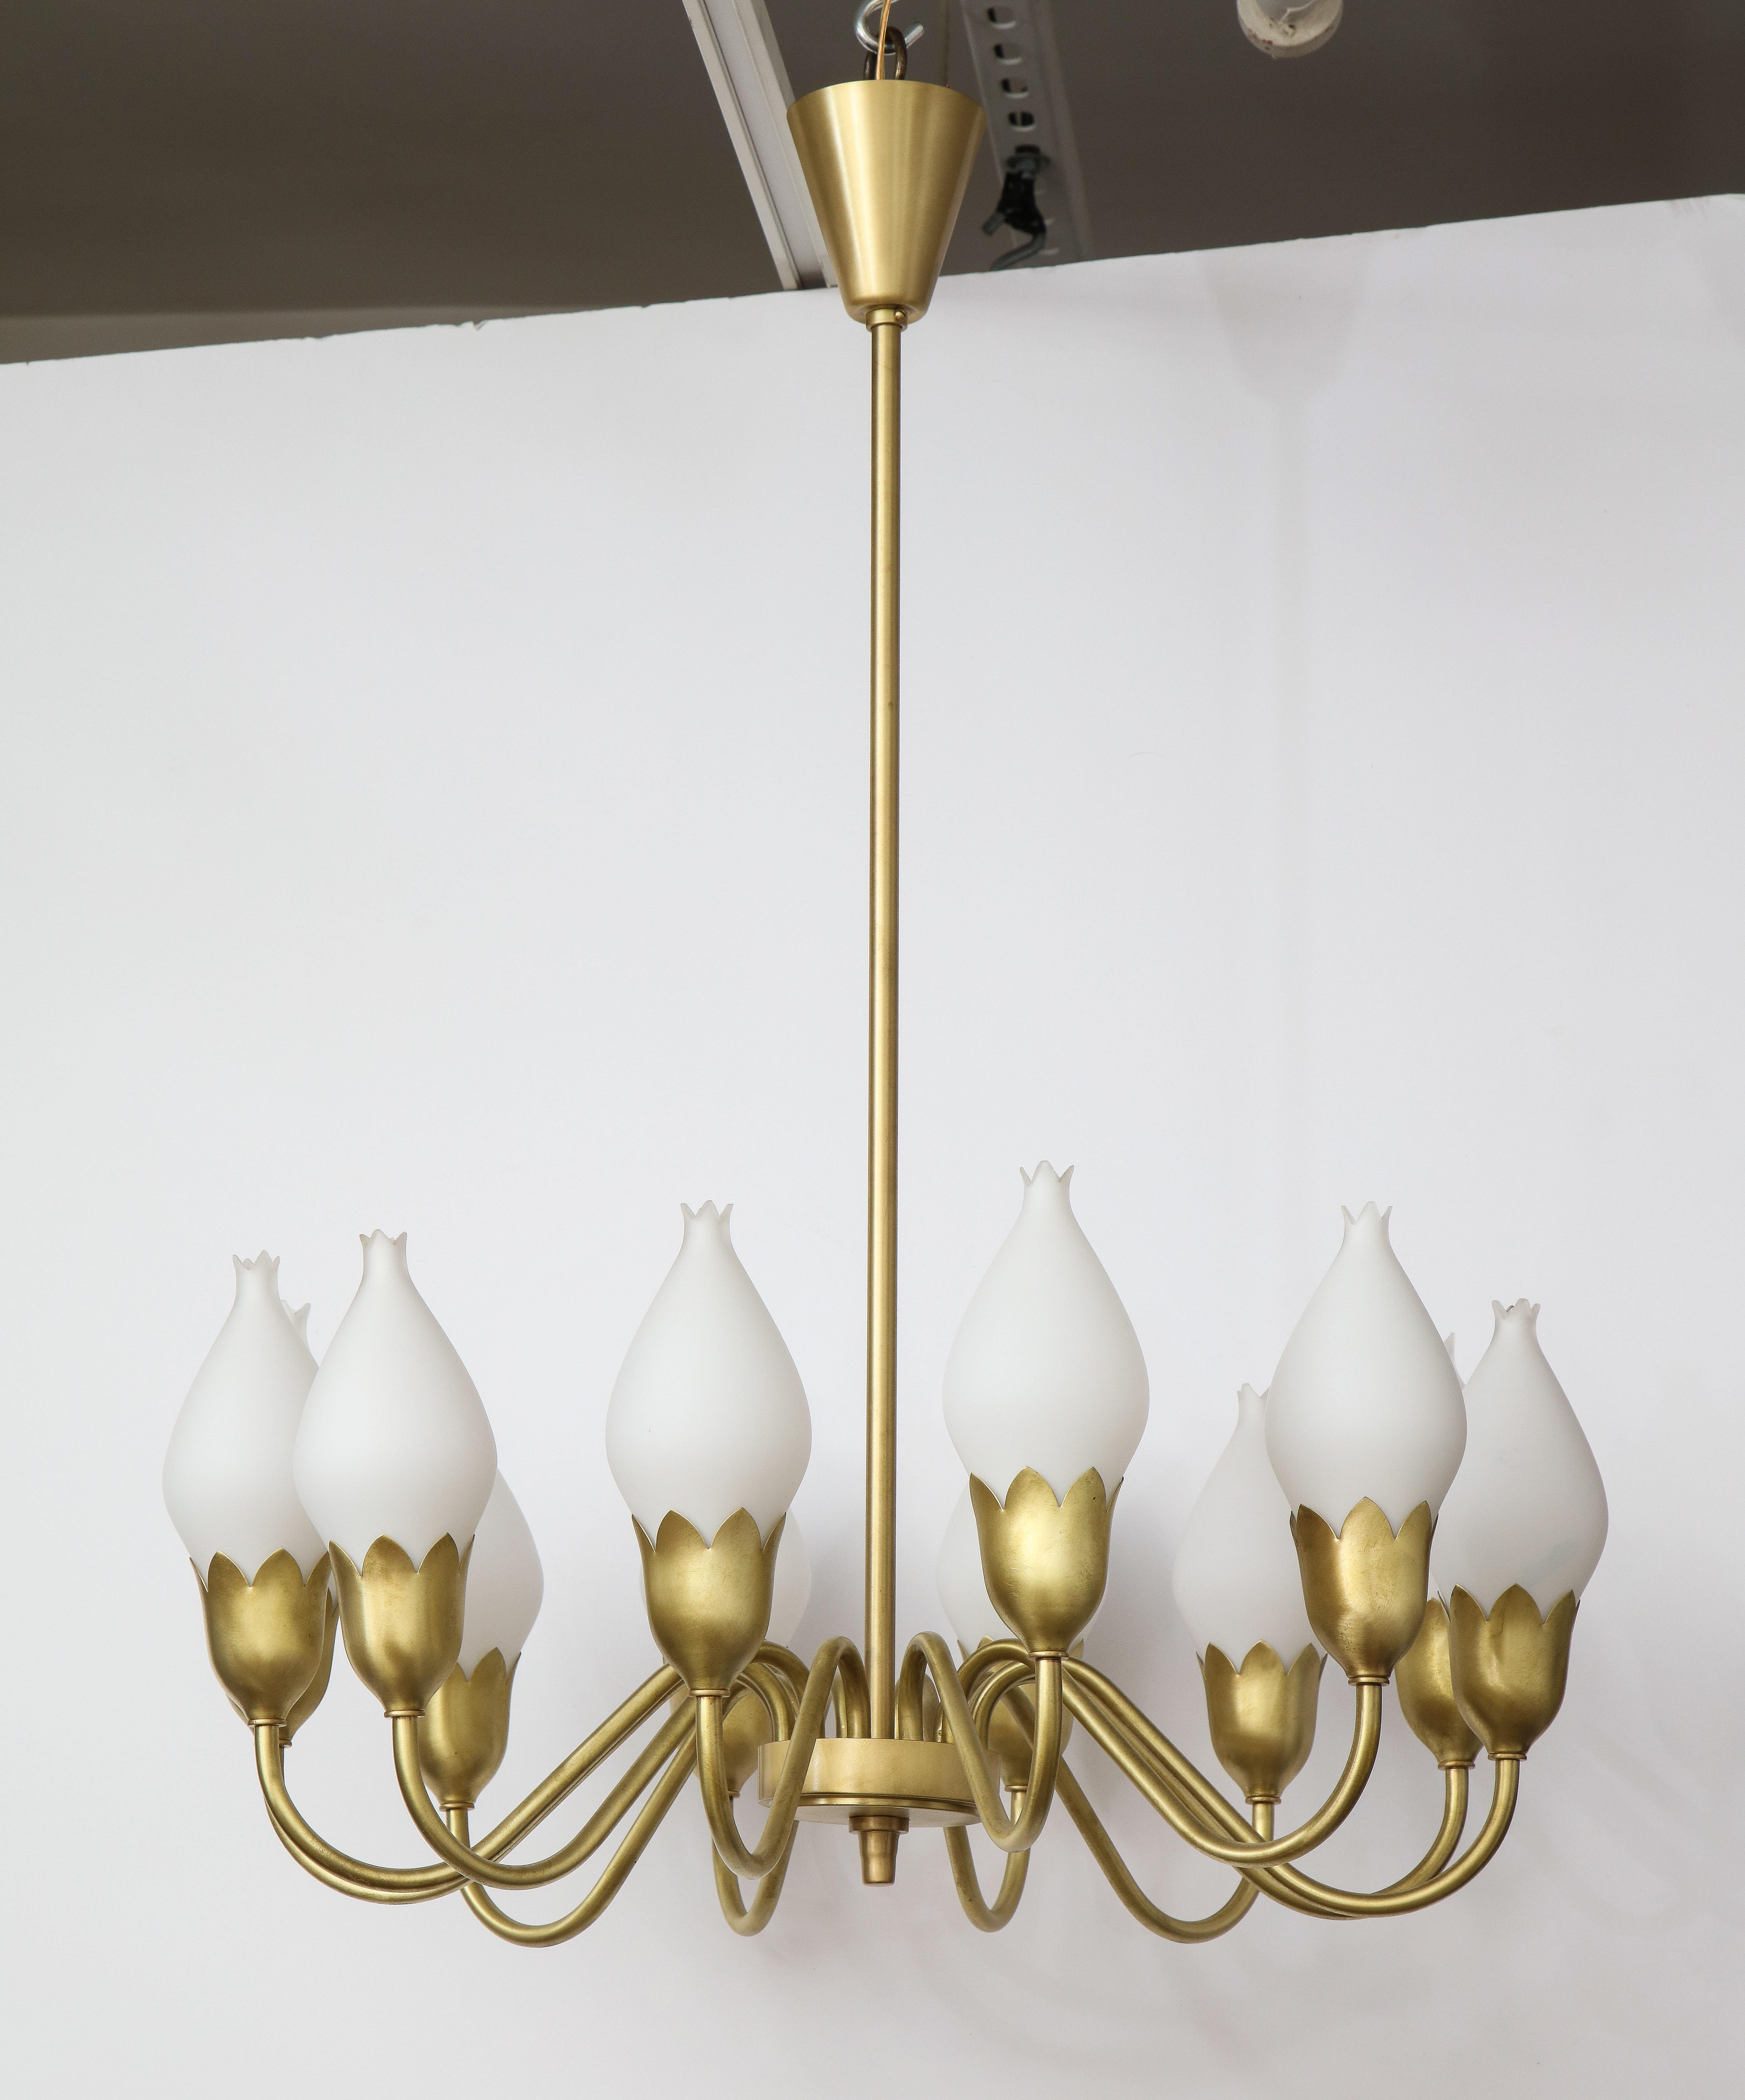 Danish modern chandelier featuring a satin brass armiture supporting 12 stylized white opaline glass 